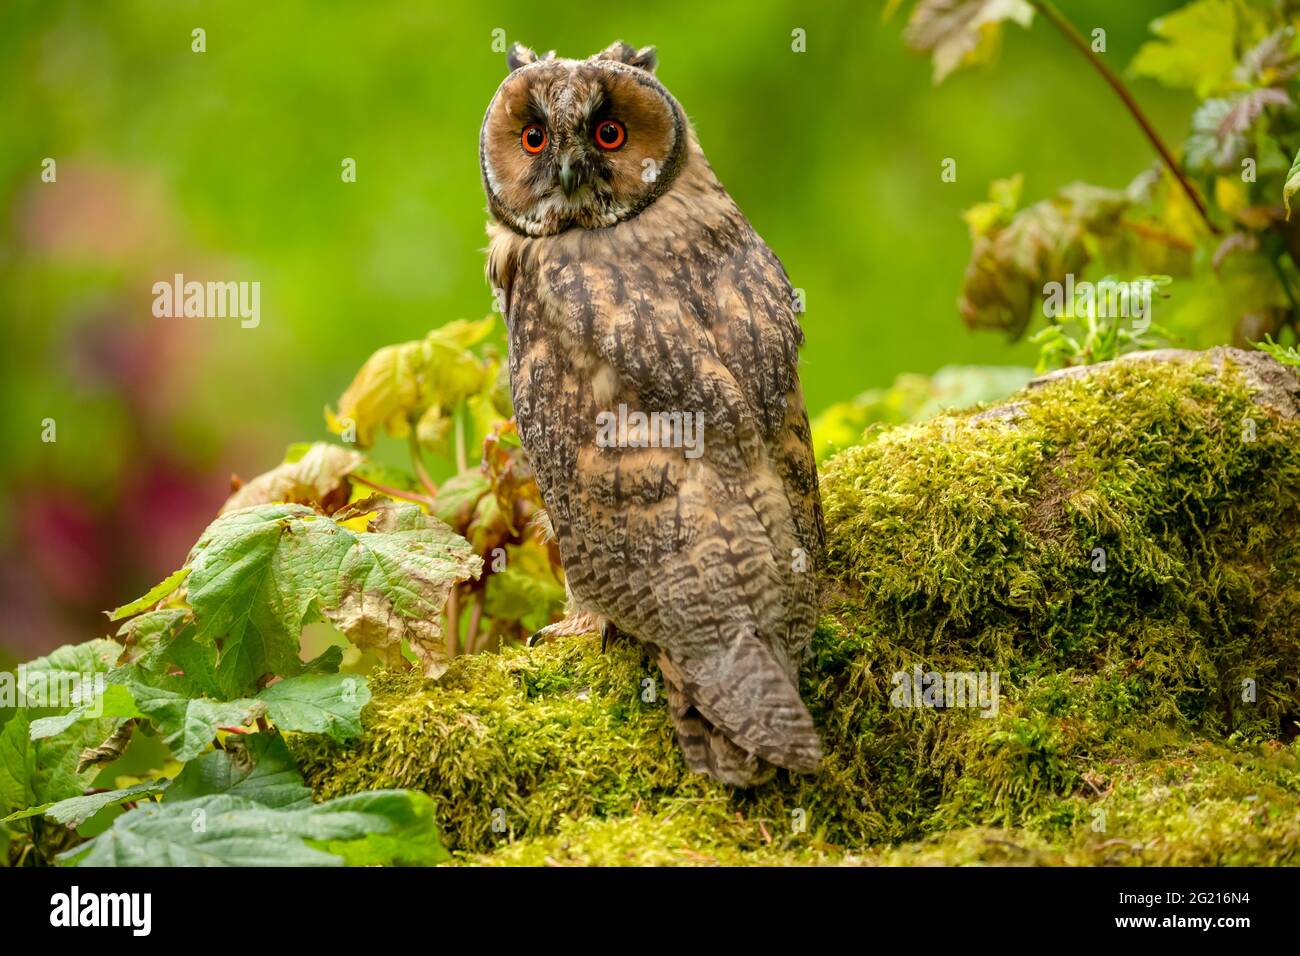 Long eared owl, juvenile.  Scientific name: Asio otus.  Close-up of a young, long eared owl with bright orange eyes, perched on a mossy green log in n Stock Photo